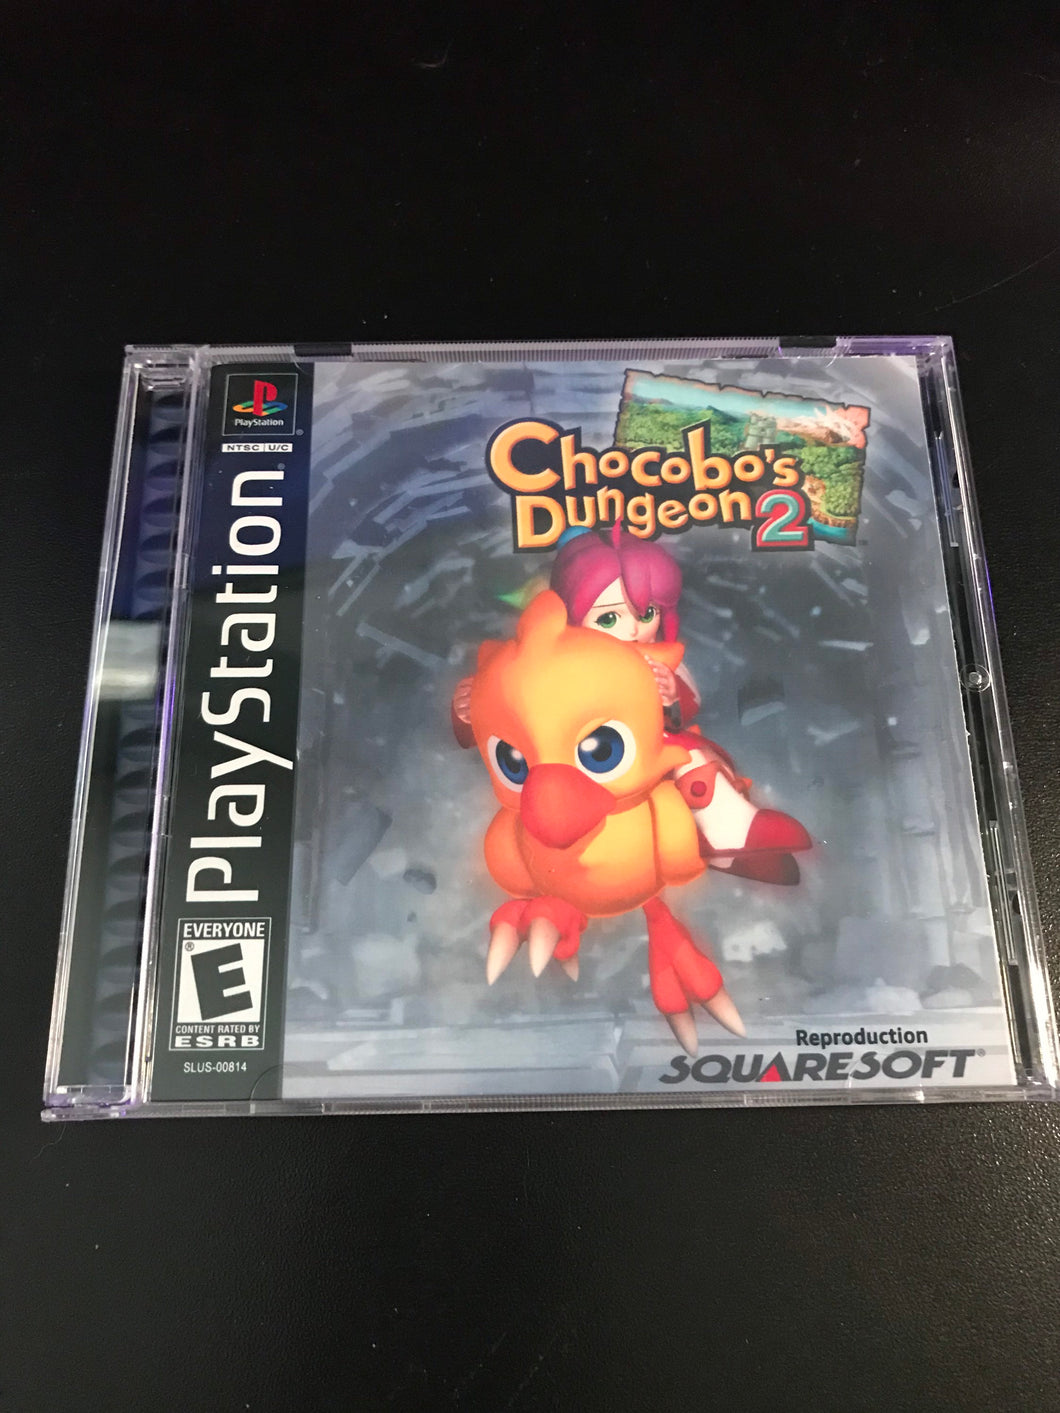 Chocobo’s Dungeon 2 PS1 Reproduction Case